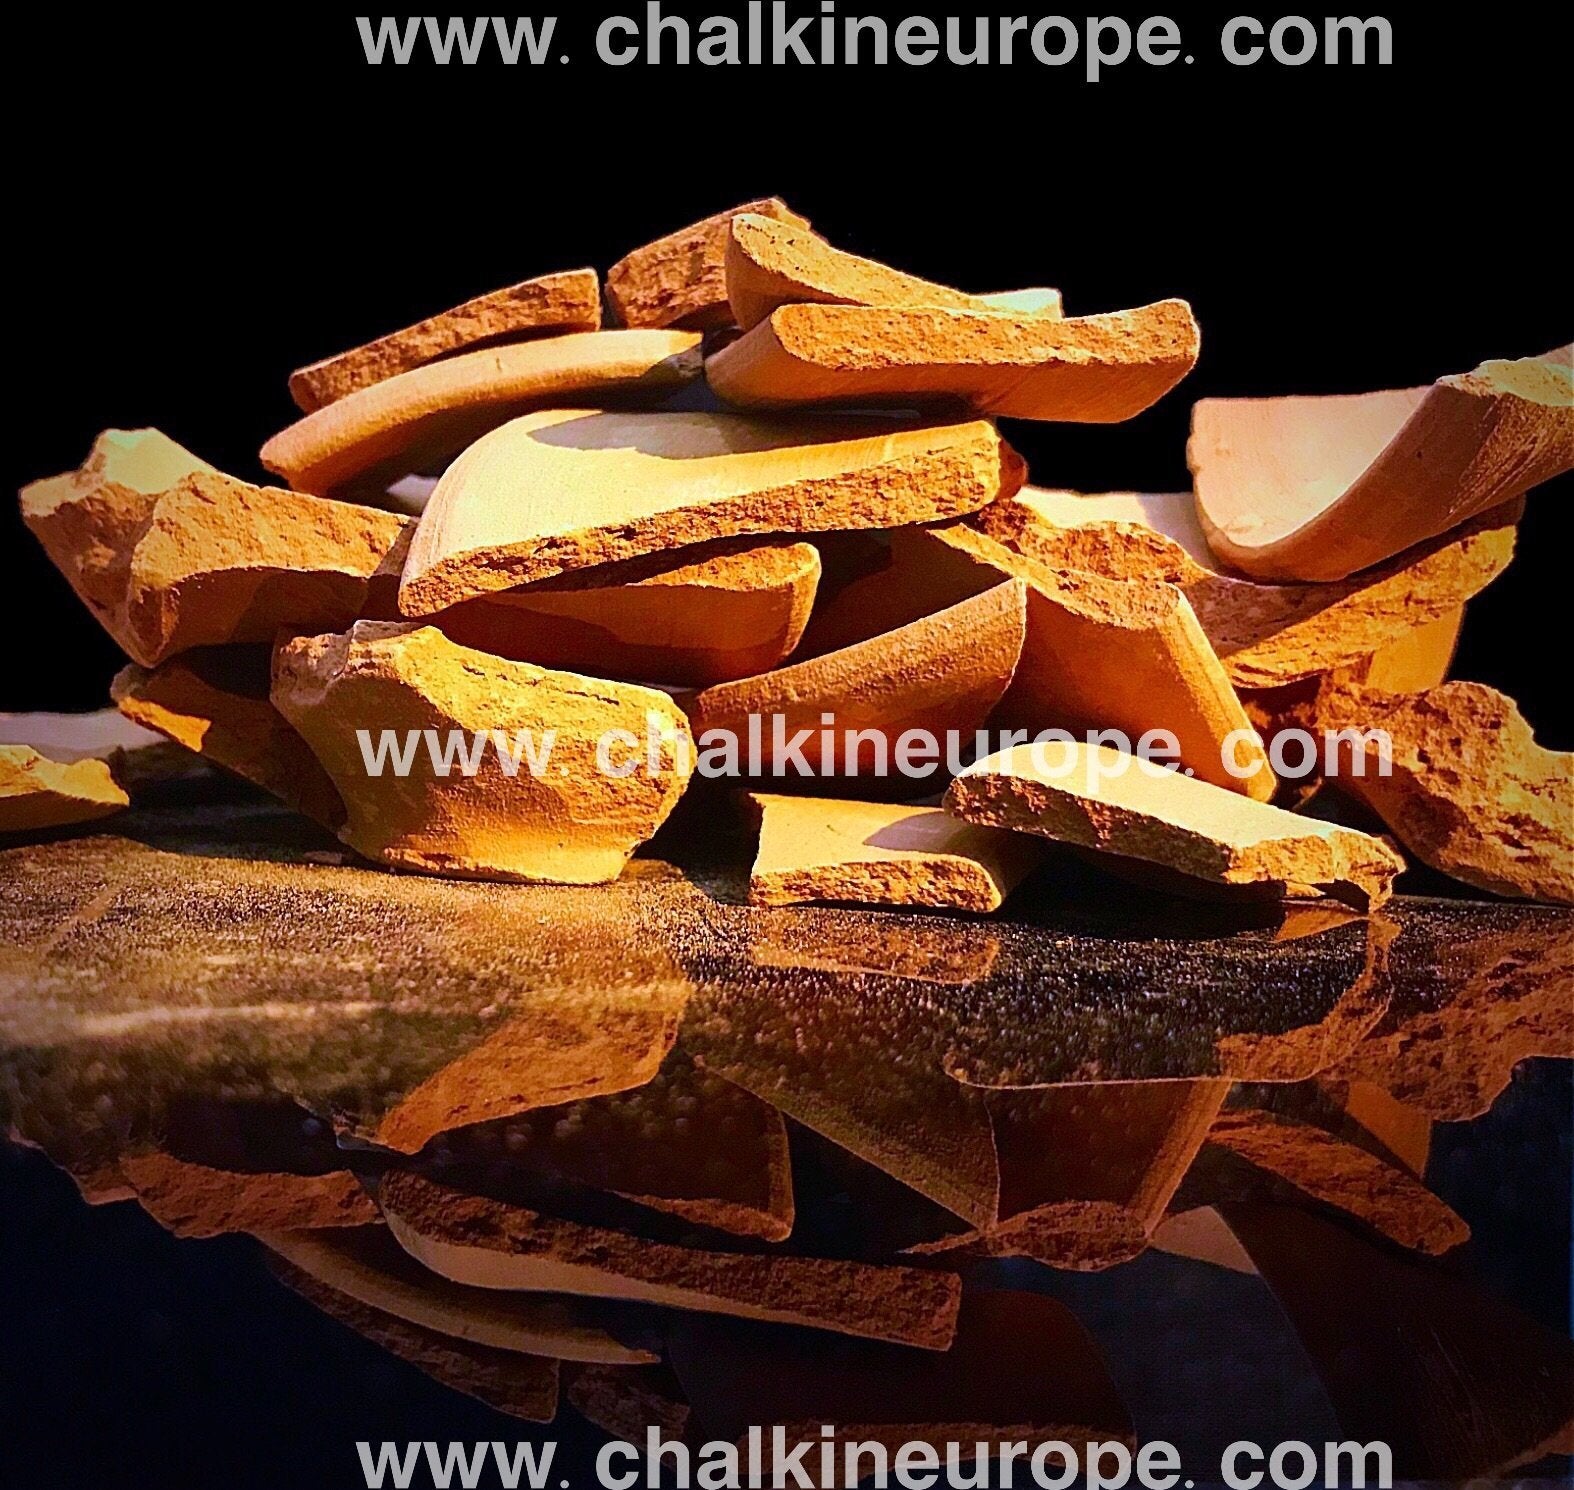 Clay Pot Chips - Chalkineurope